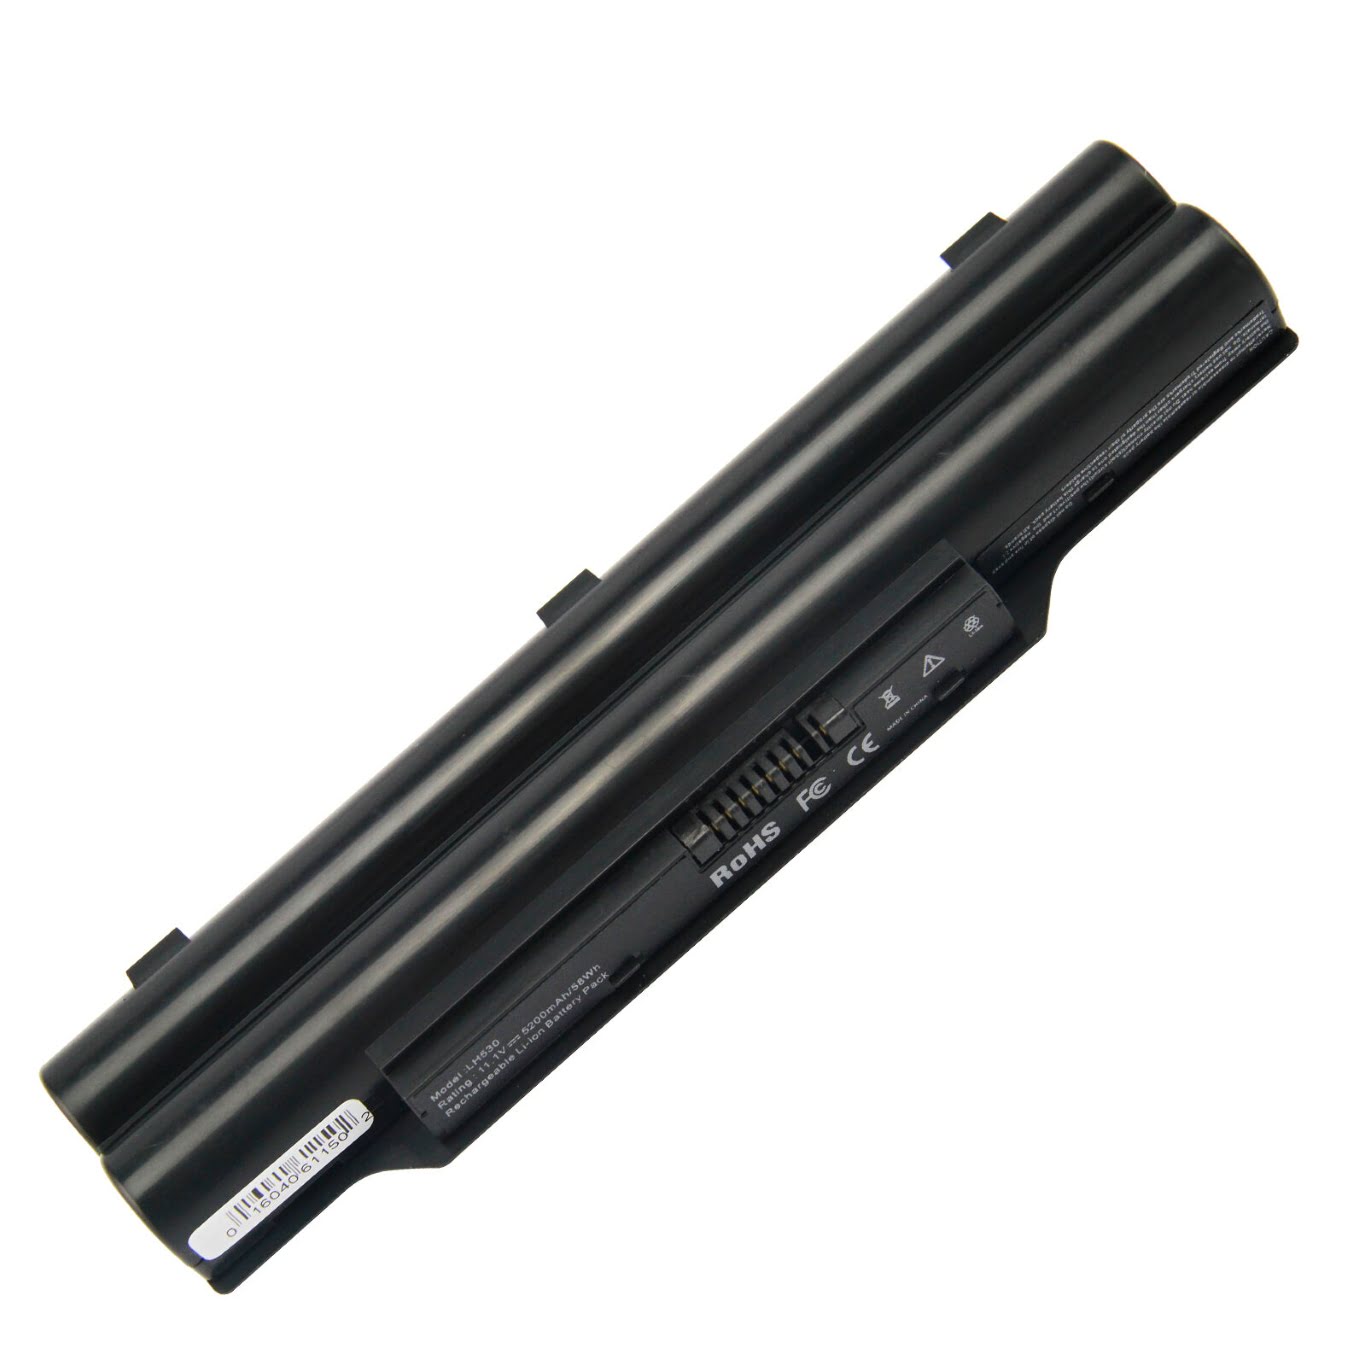 Fujitsu Cp477891-01, Cp477891-03 Laptop Battery For Lifebook A530, Lifebook A531 replacement